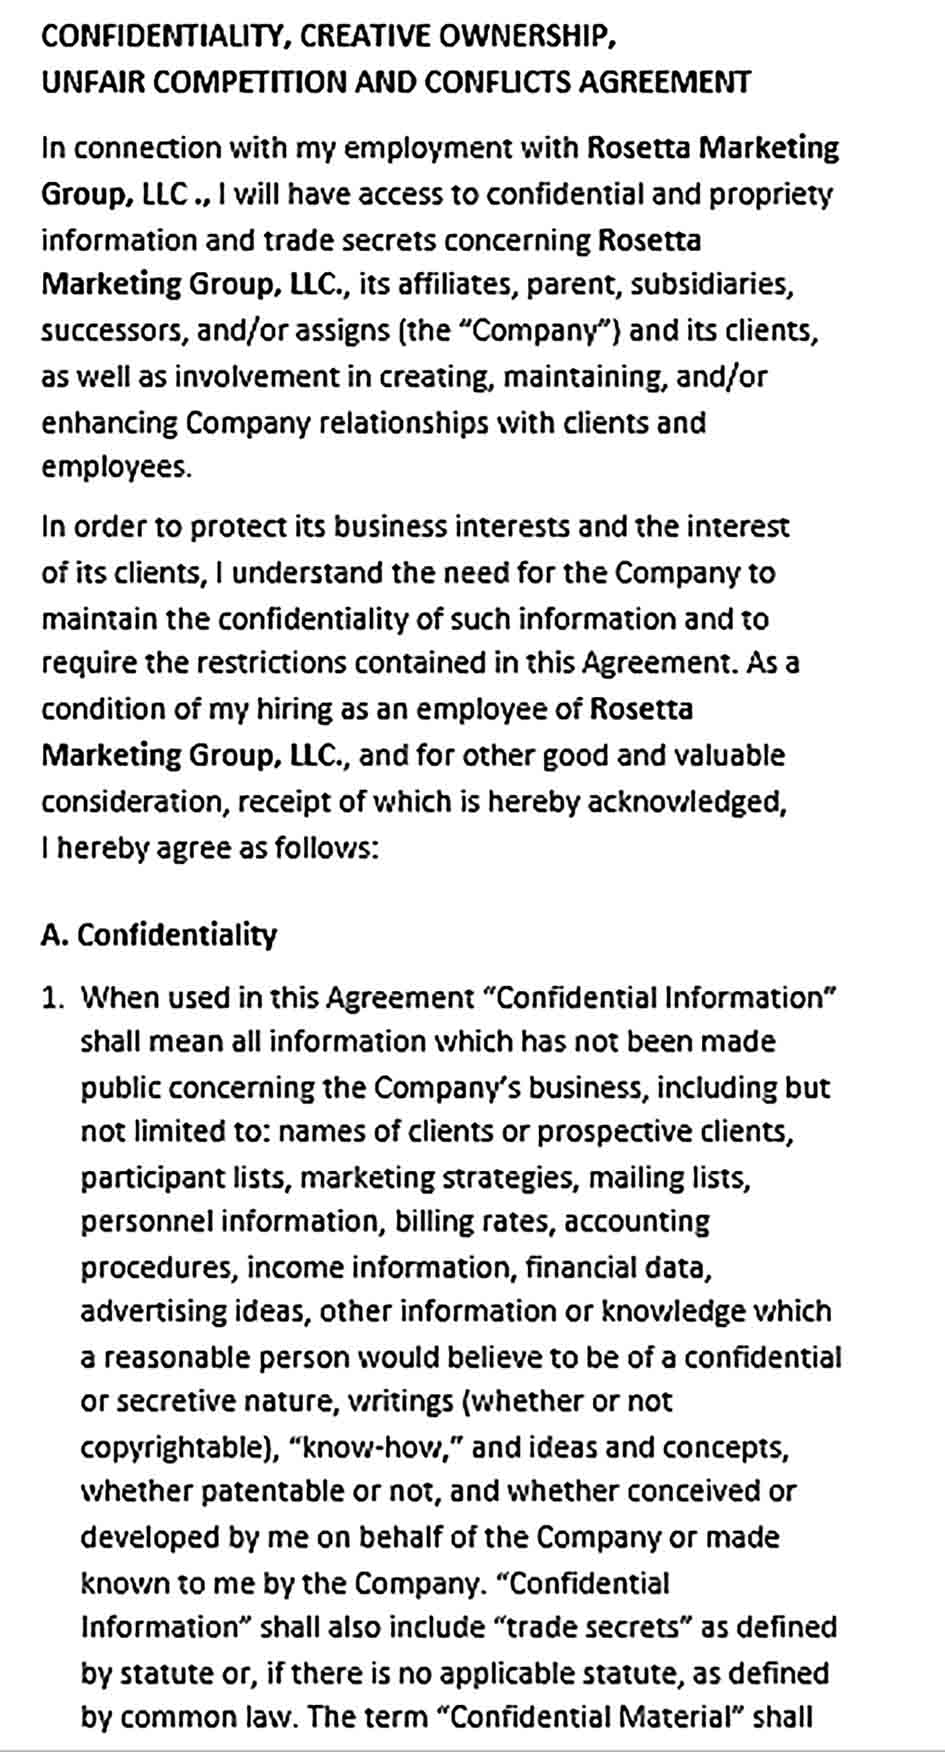 Sample Legal Confidentiality Agreement